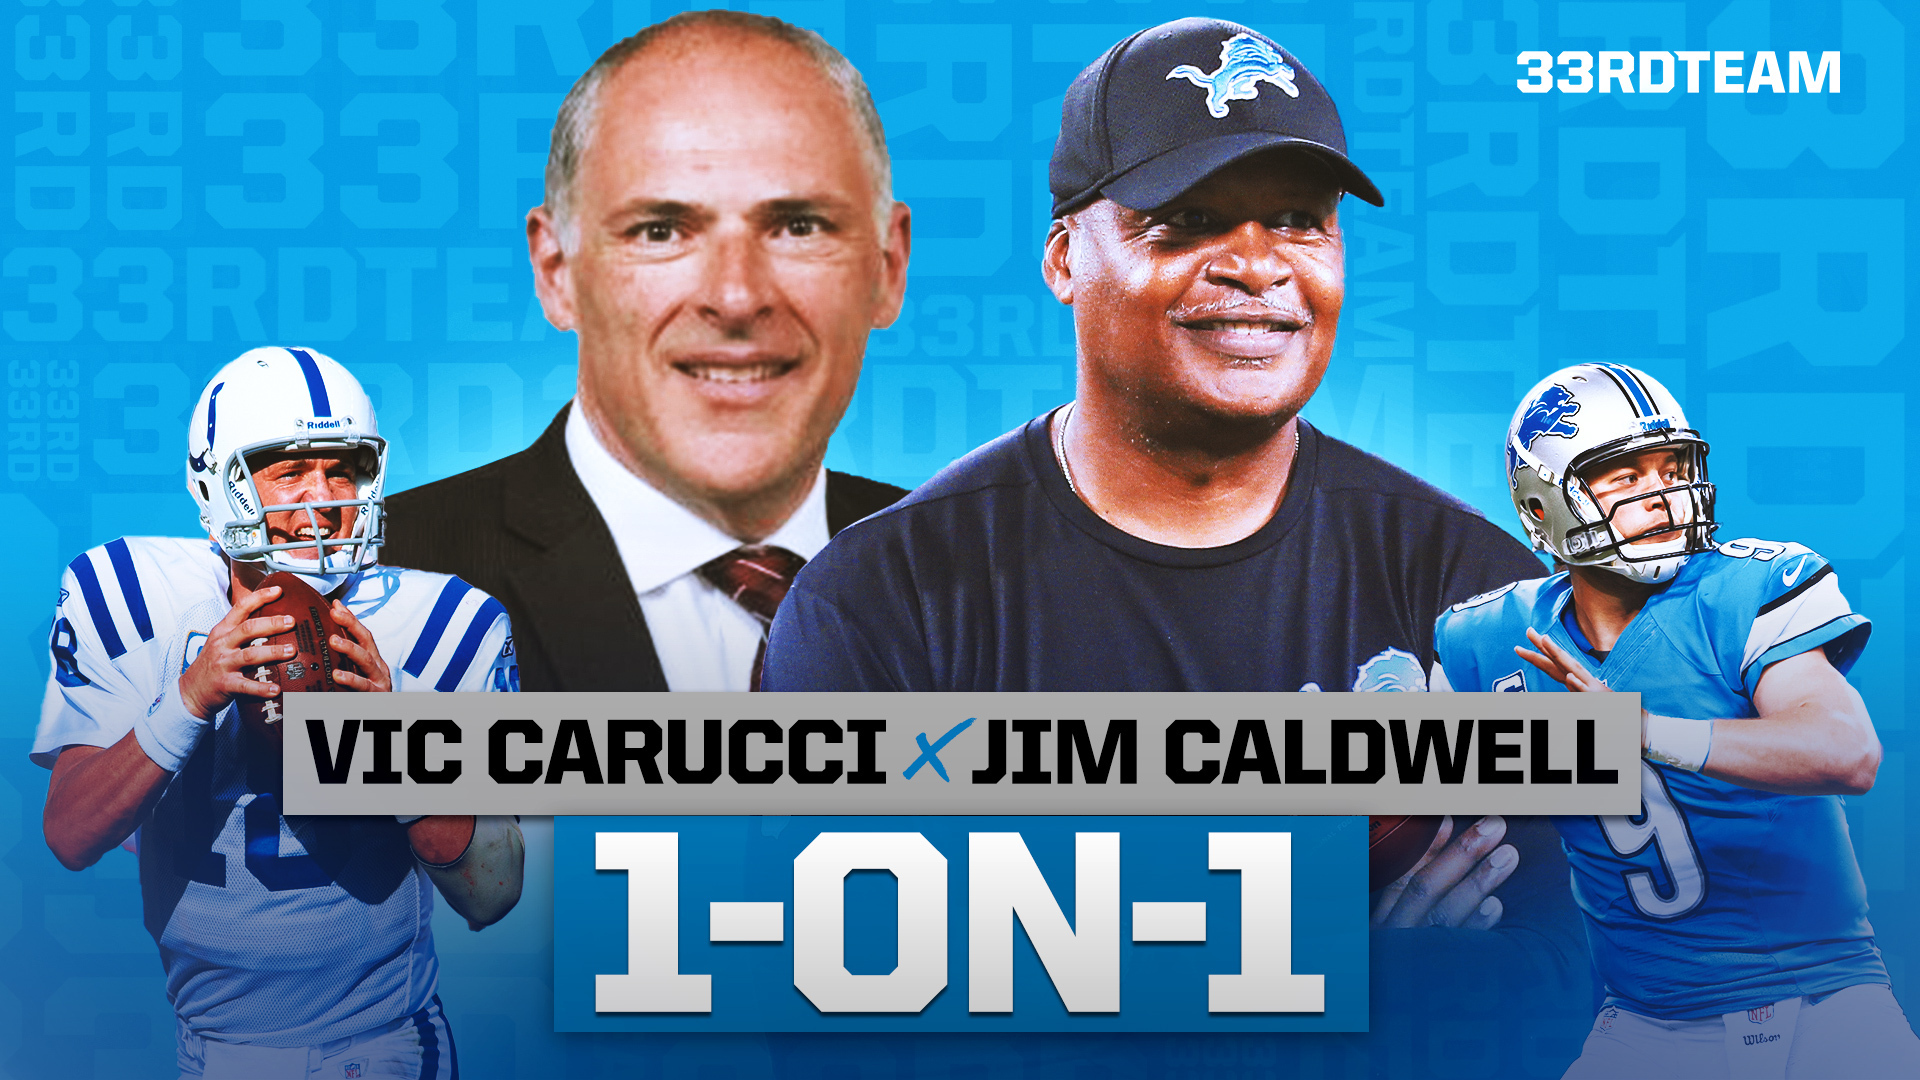 One-on-One With Jim Caldwell: Coaching is About Expertise, Empathy